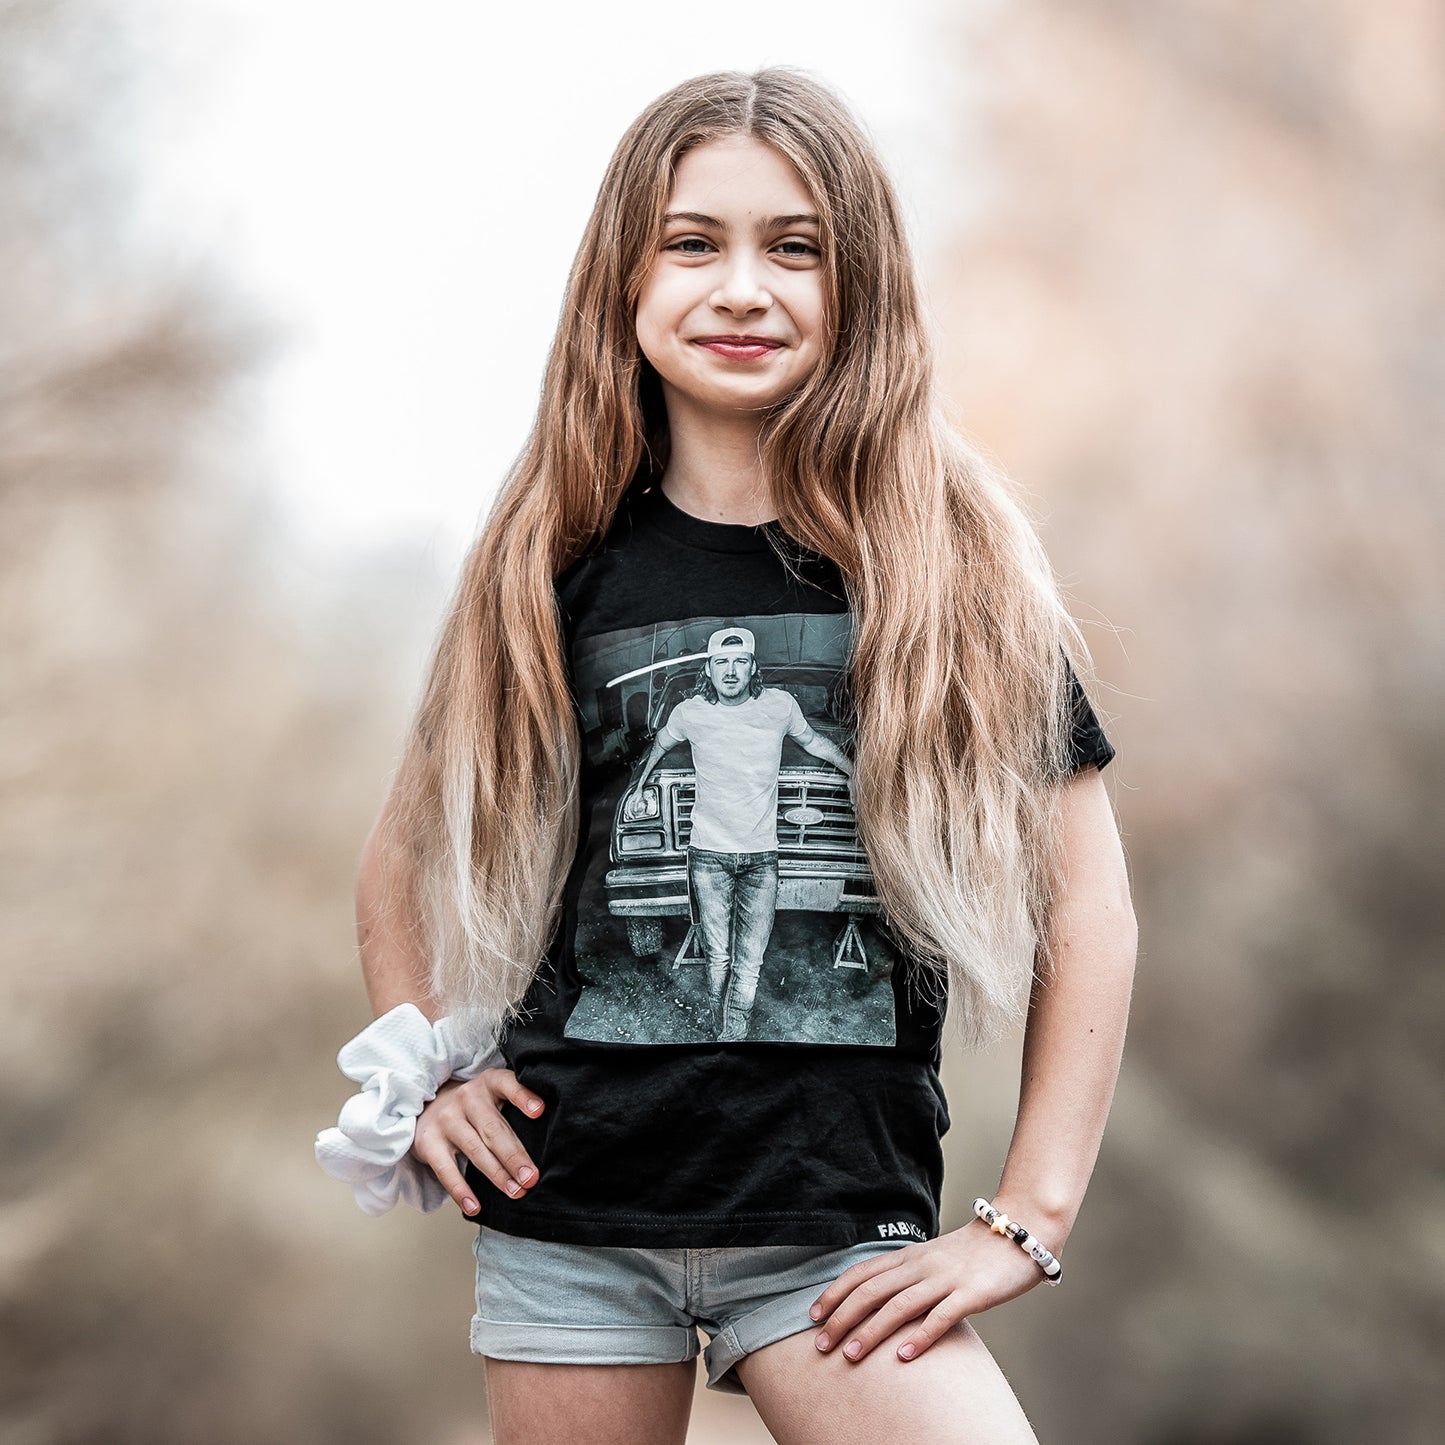 Retro Wallen Tee – Kids, Boys, Girls, Teens Country Western T-shirt for the Next Generation of Country Music Lovers